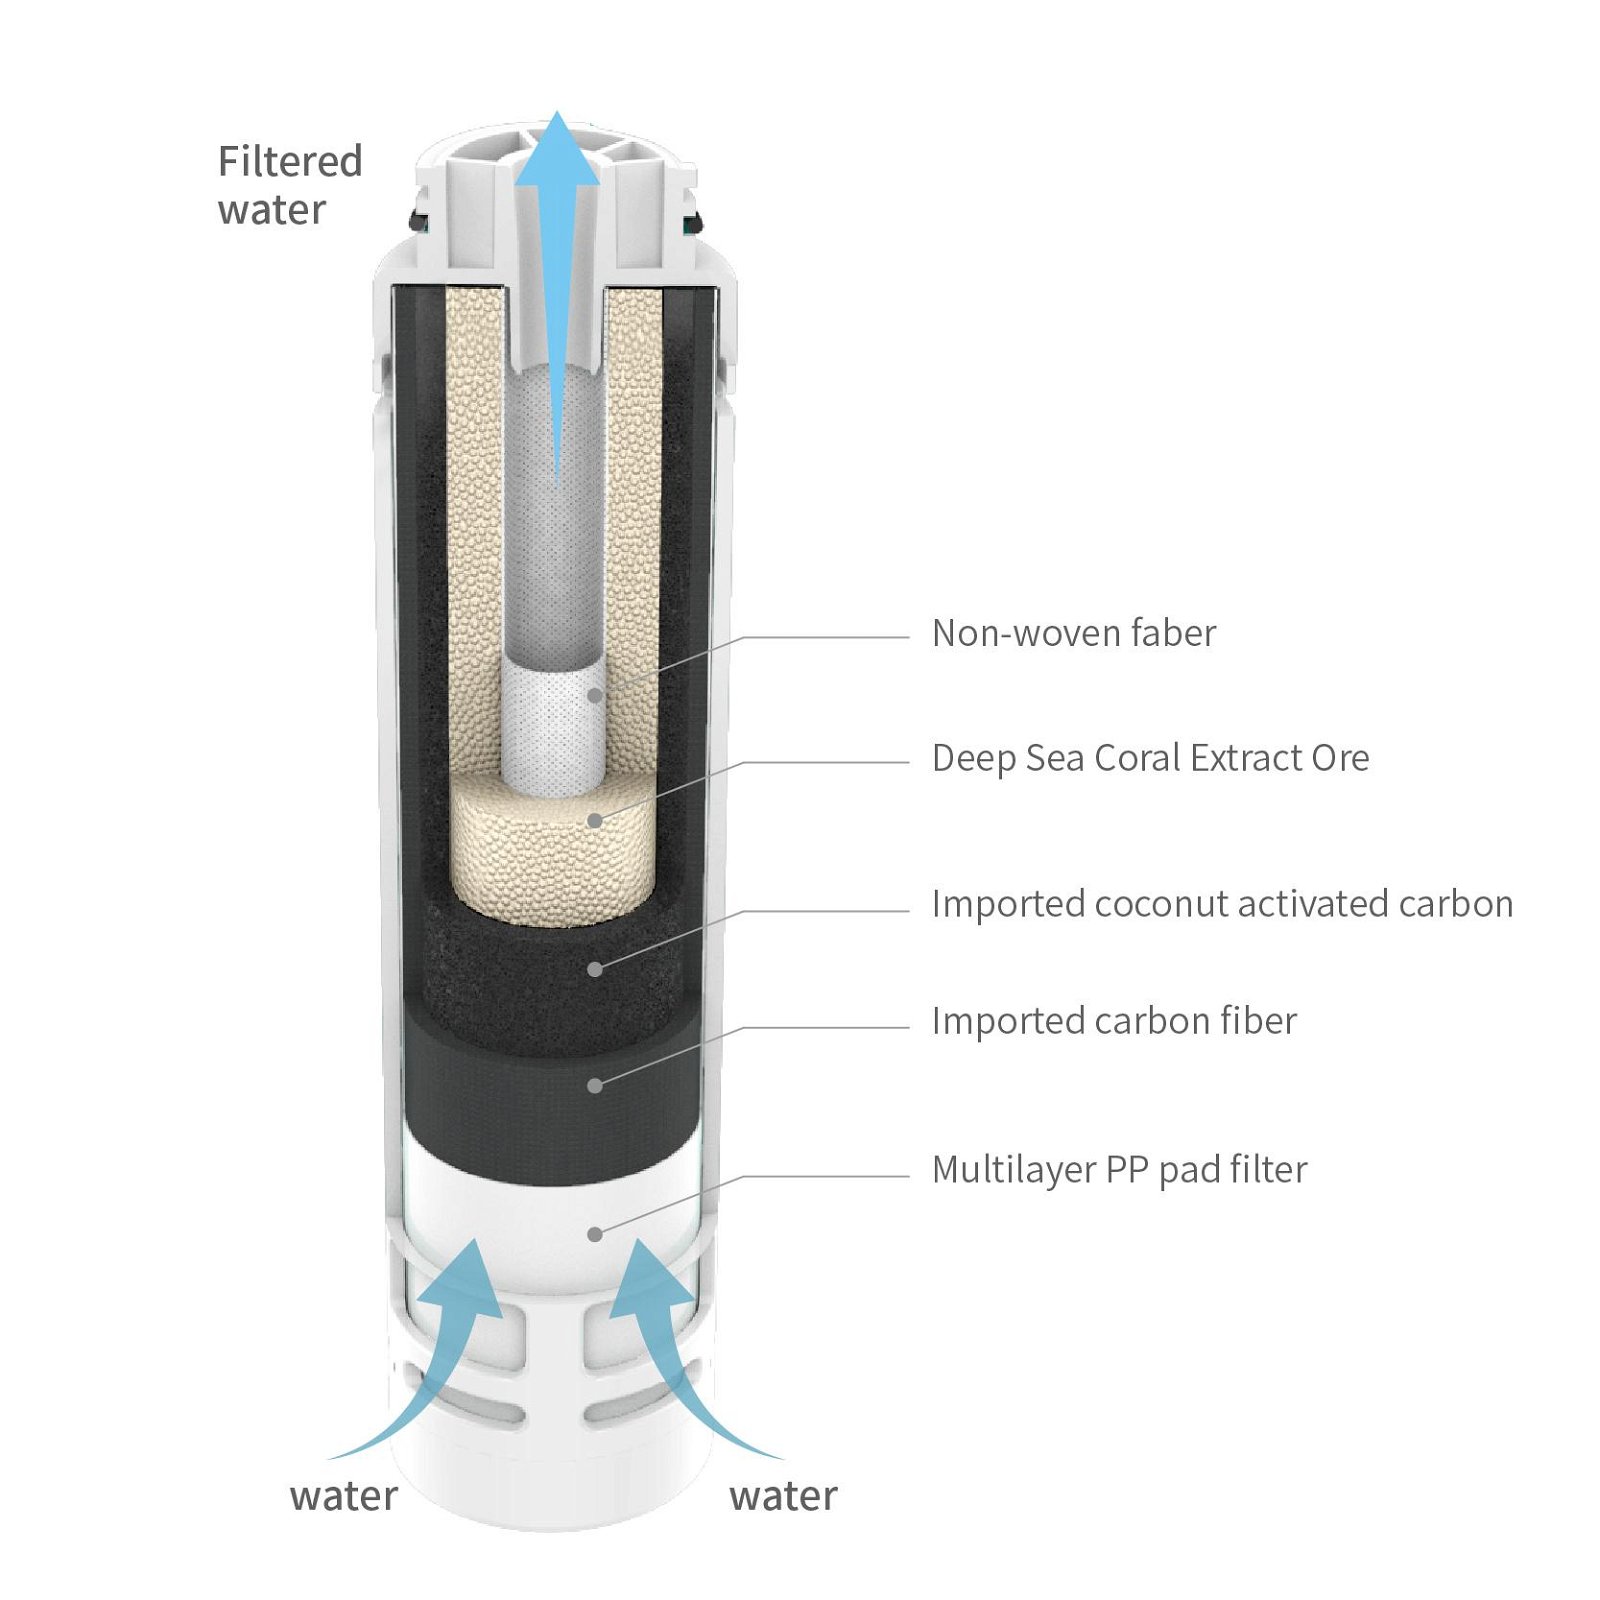  camping water filter chlorine free  water purifier  plastic bottle with filter  3